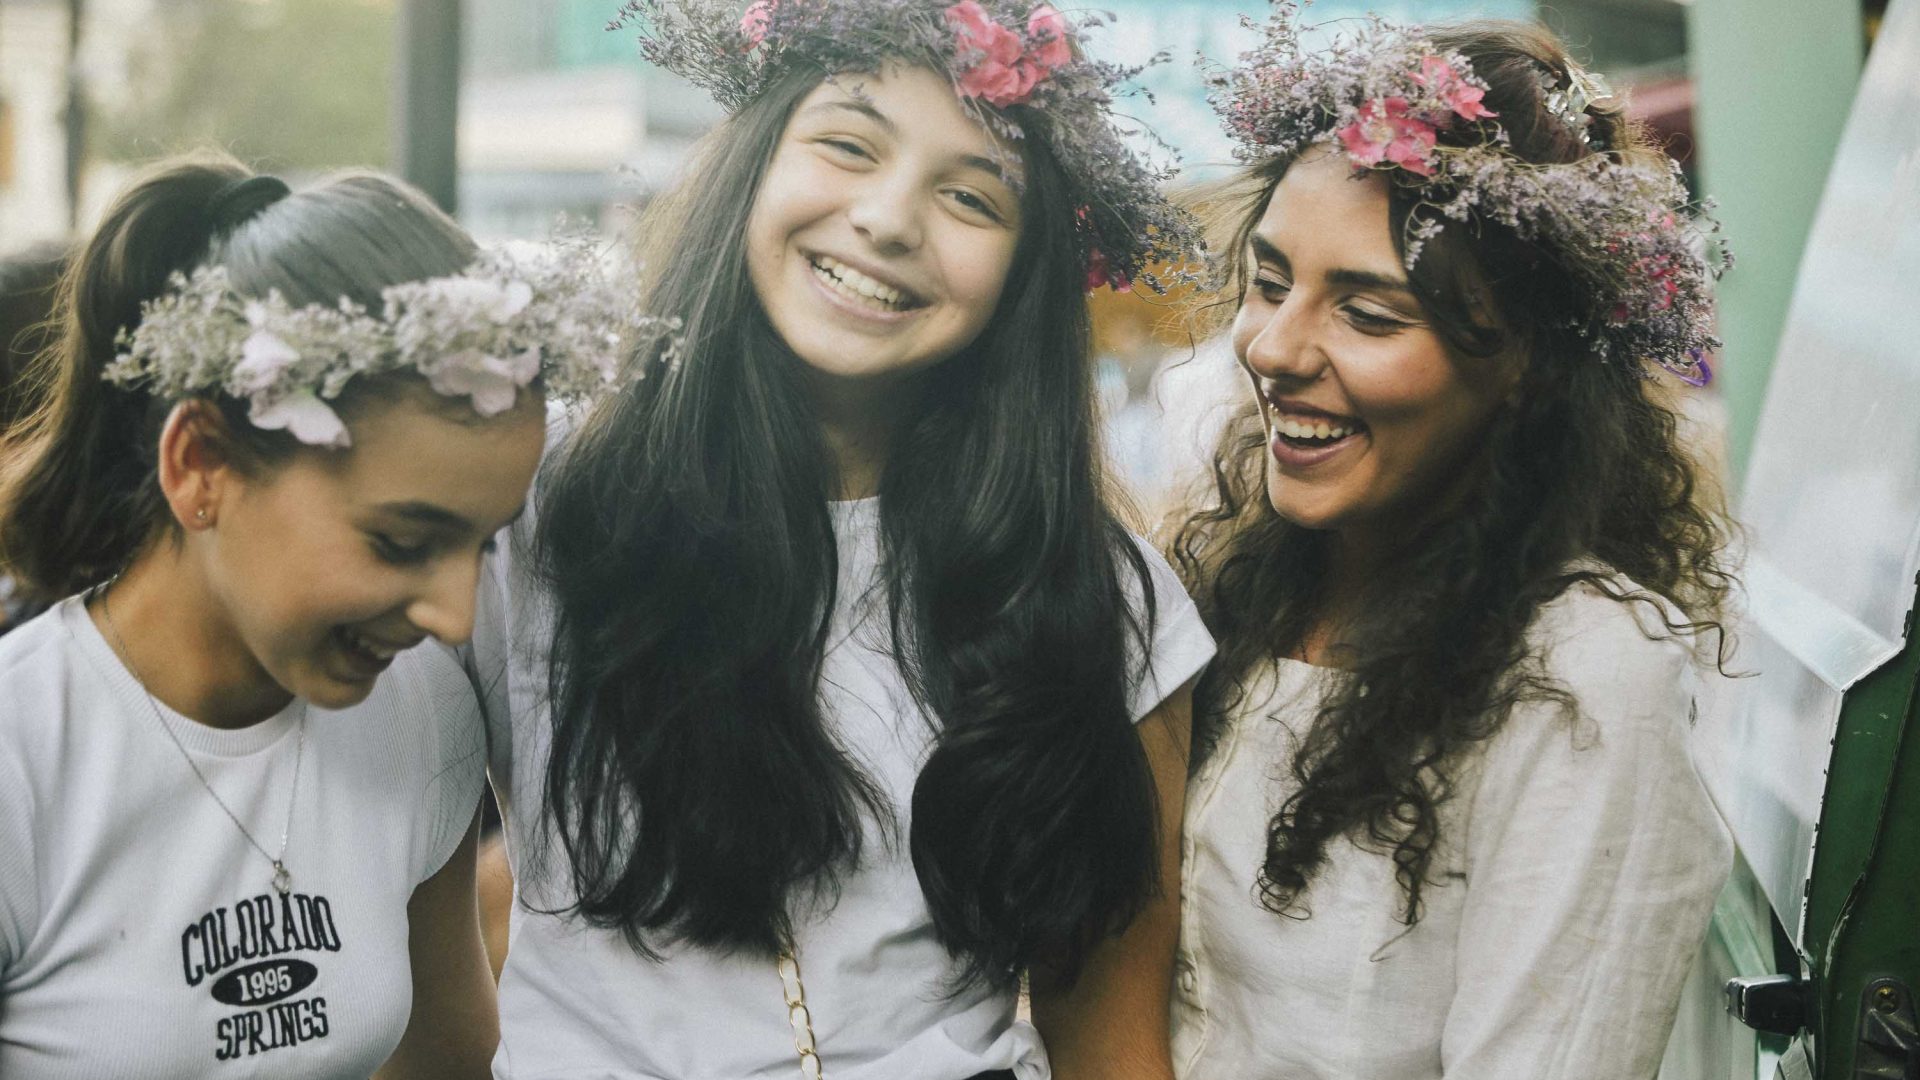 Three young women with floral arrangements in their hair.